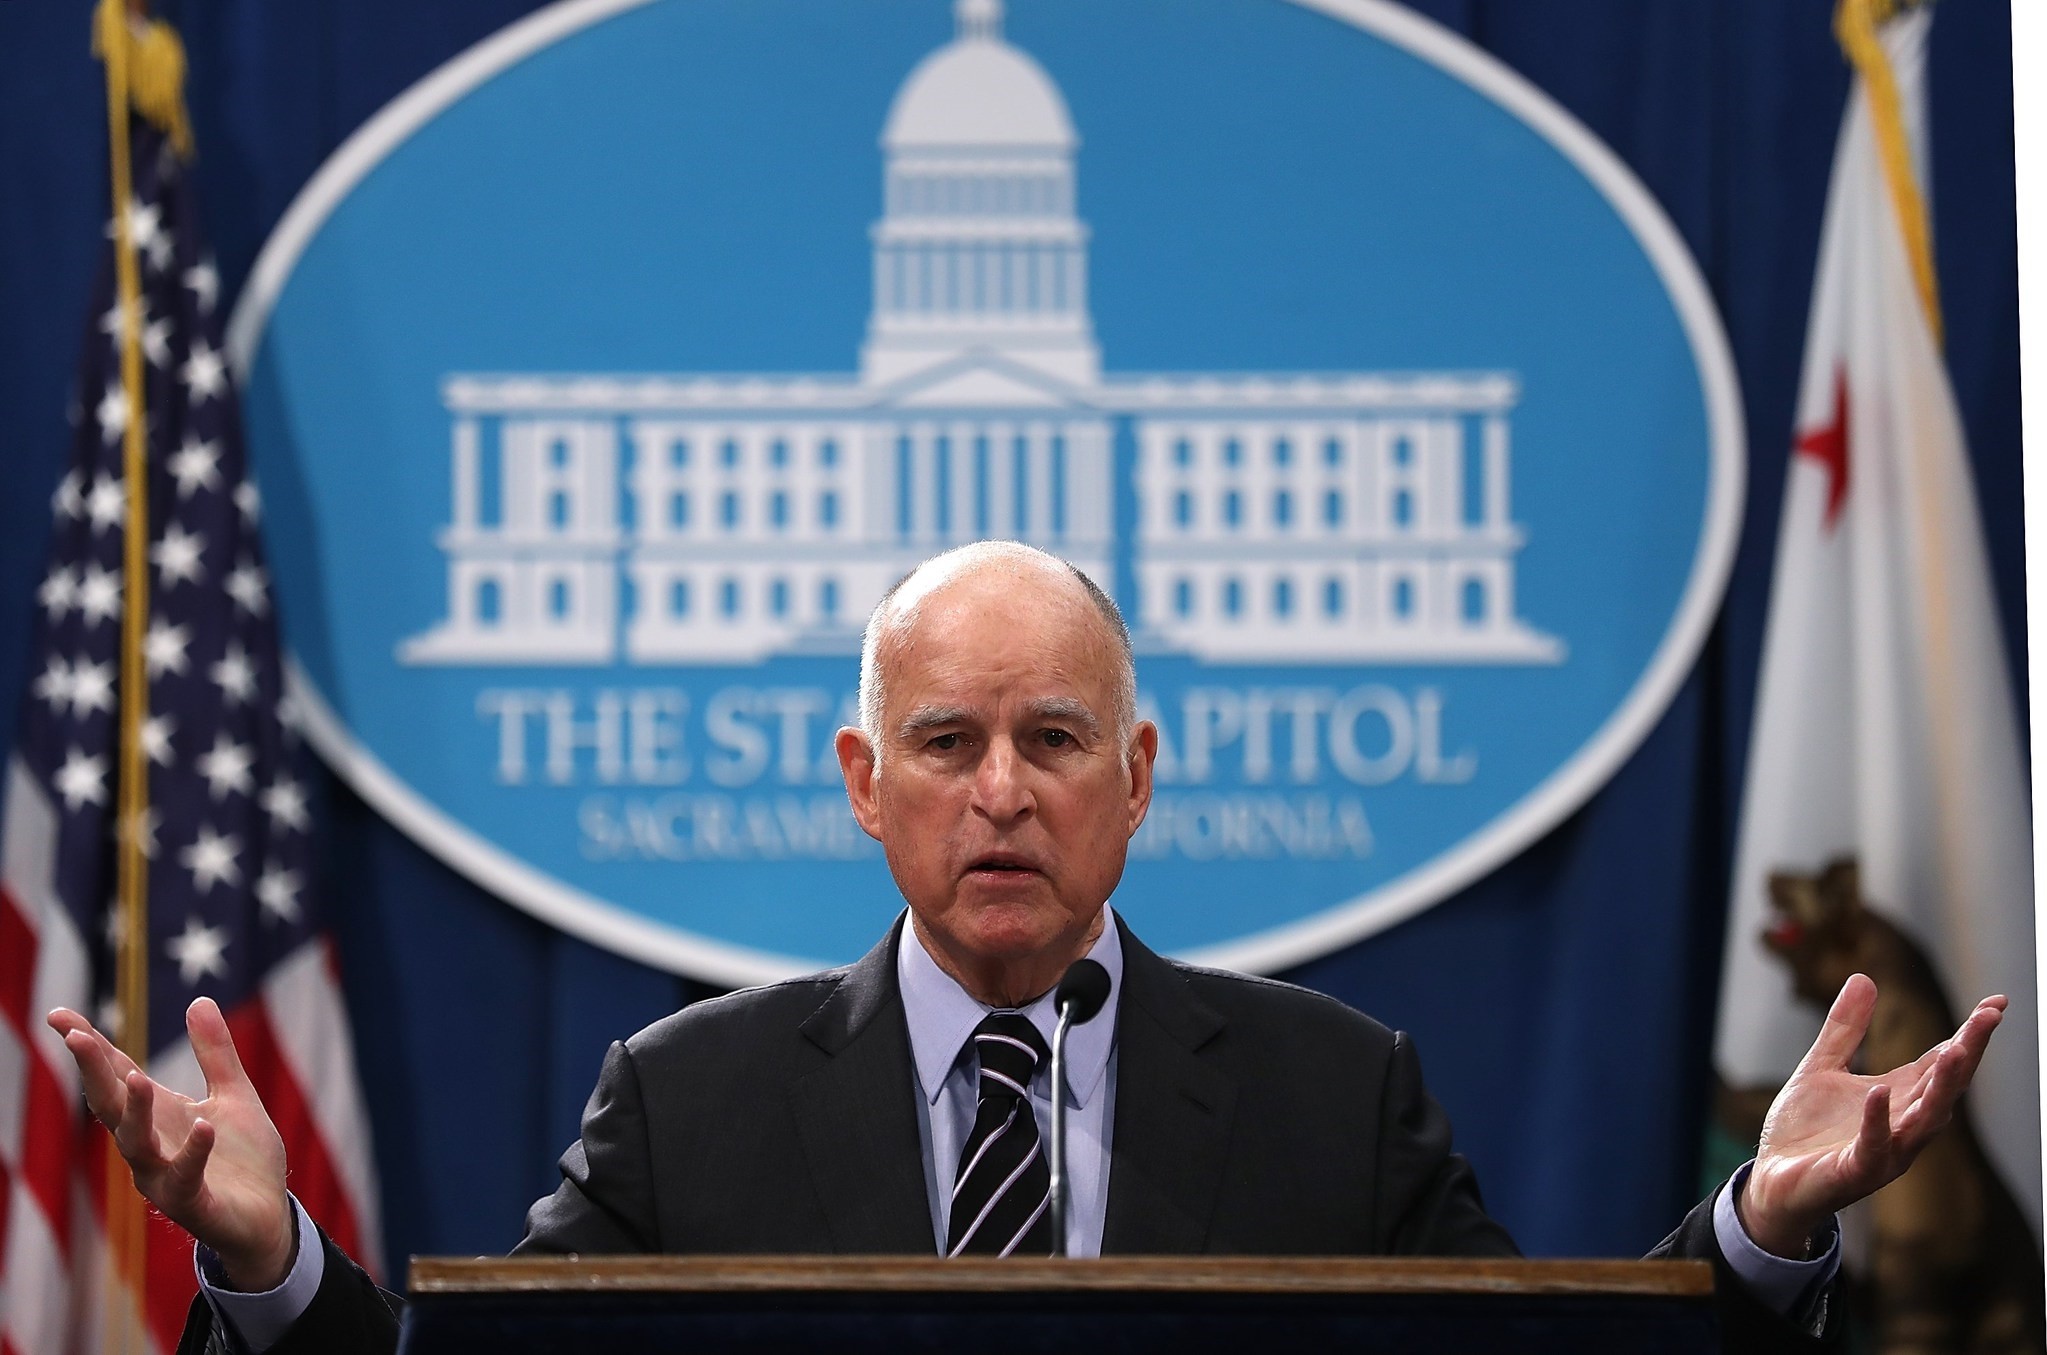 California Gov. Jerry Brown speaks to reporters during a news conference where he revealed his revised California State budget on May 11, 2017. (AP Photo)